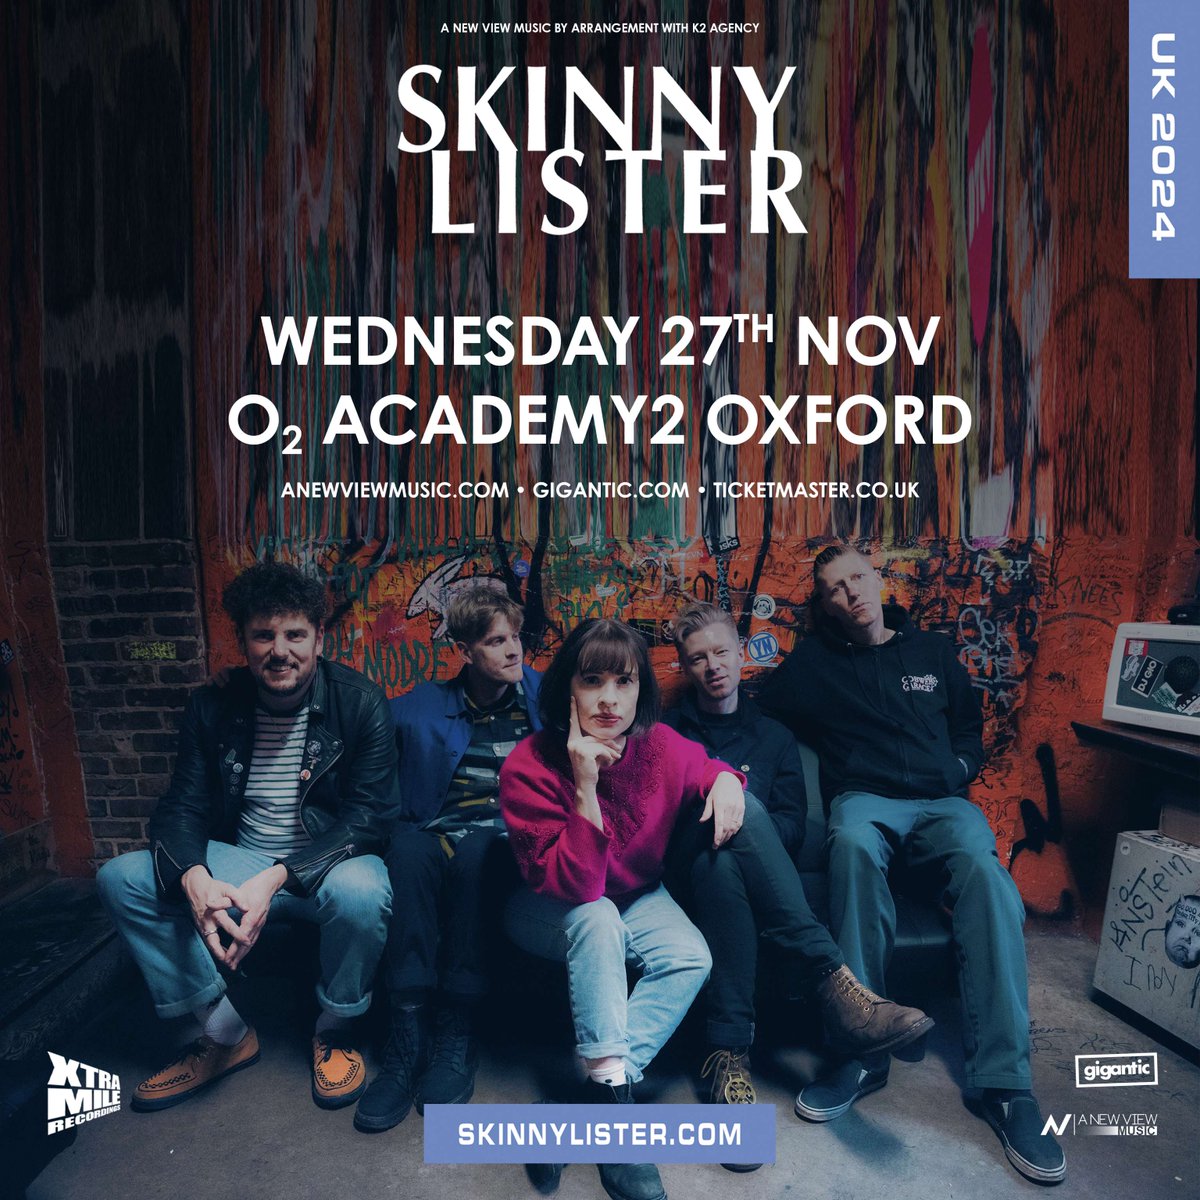 A @SkinnyLister gig is the stuff of legend, full of style and stomp, bringing together all their influences, from ska to rock and from folk-punk to traditional shanty. They return to Oxford - Wed 27 Nov! Priority Tickets on sale now at #O2Priority - amg-venues.com/ONzn50Rhi4b